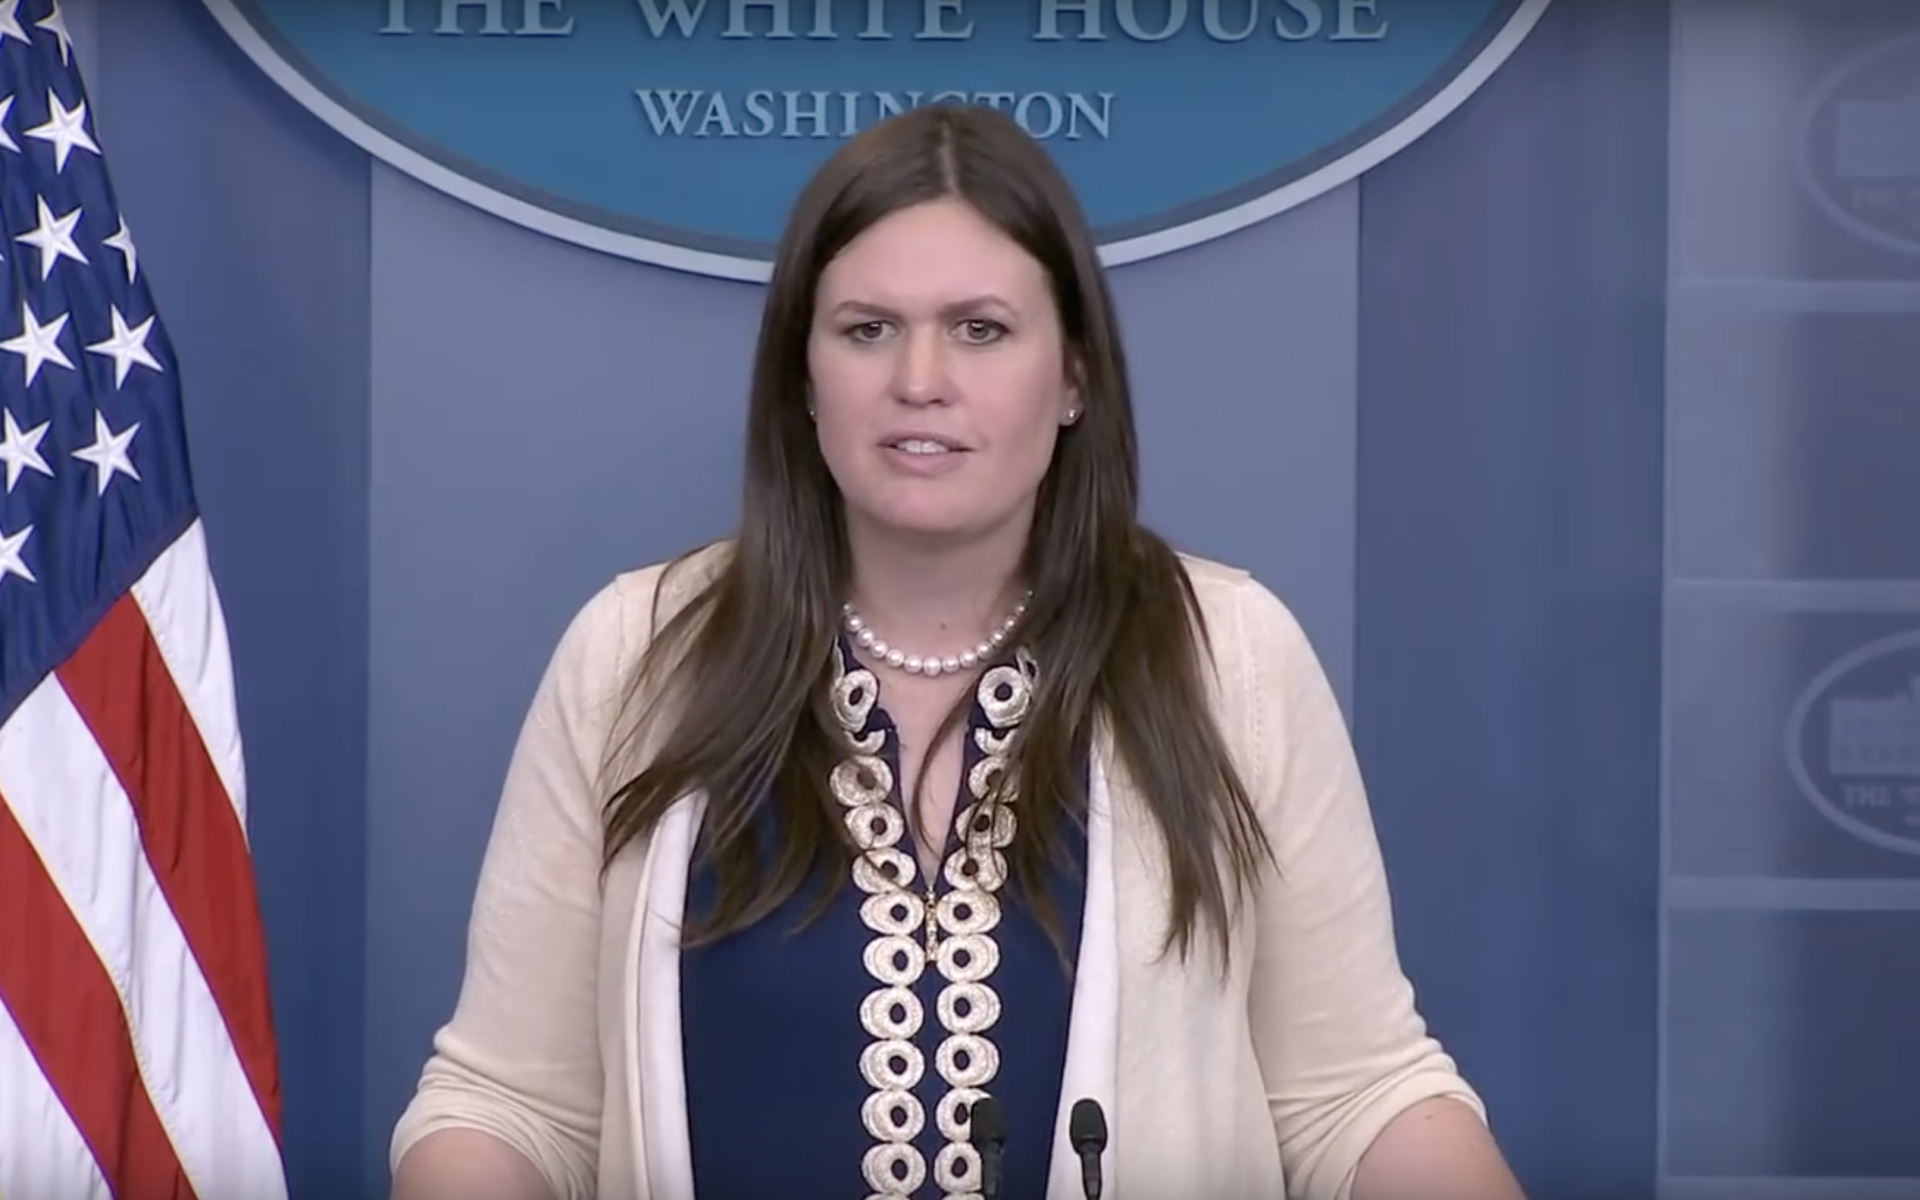 cody townsend recommends sarah huckabee sanders is sexy pic